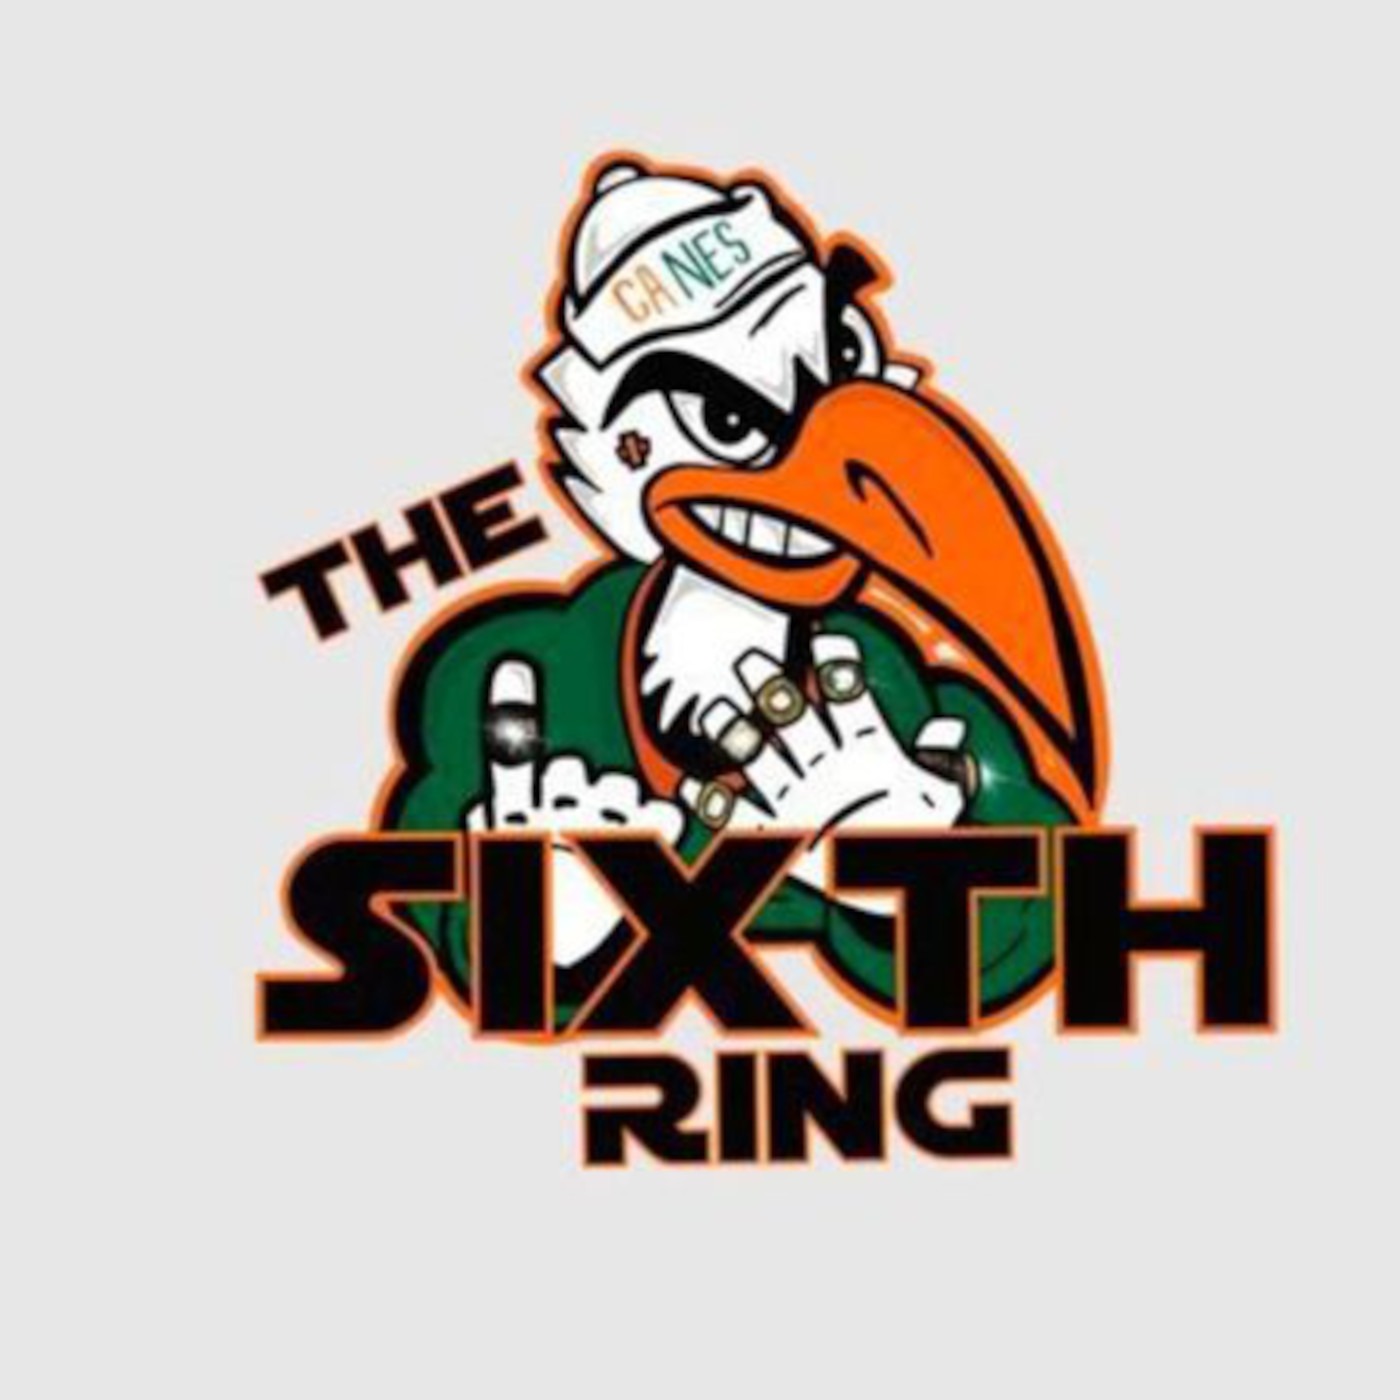 Spring Practice Opens | Sixth Ring Canes